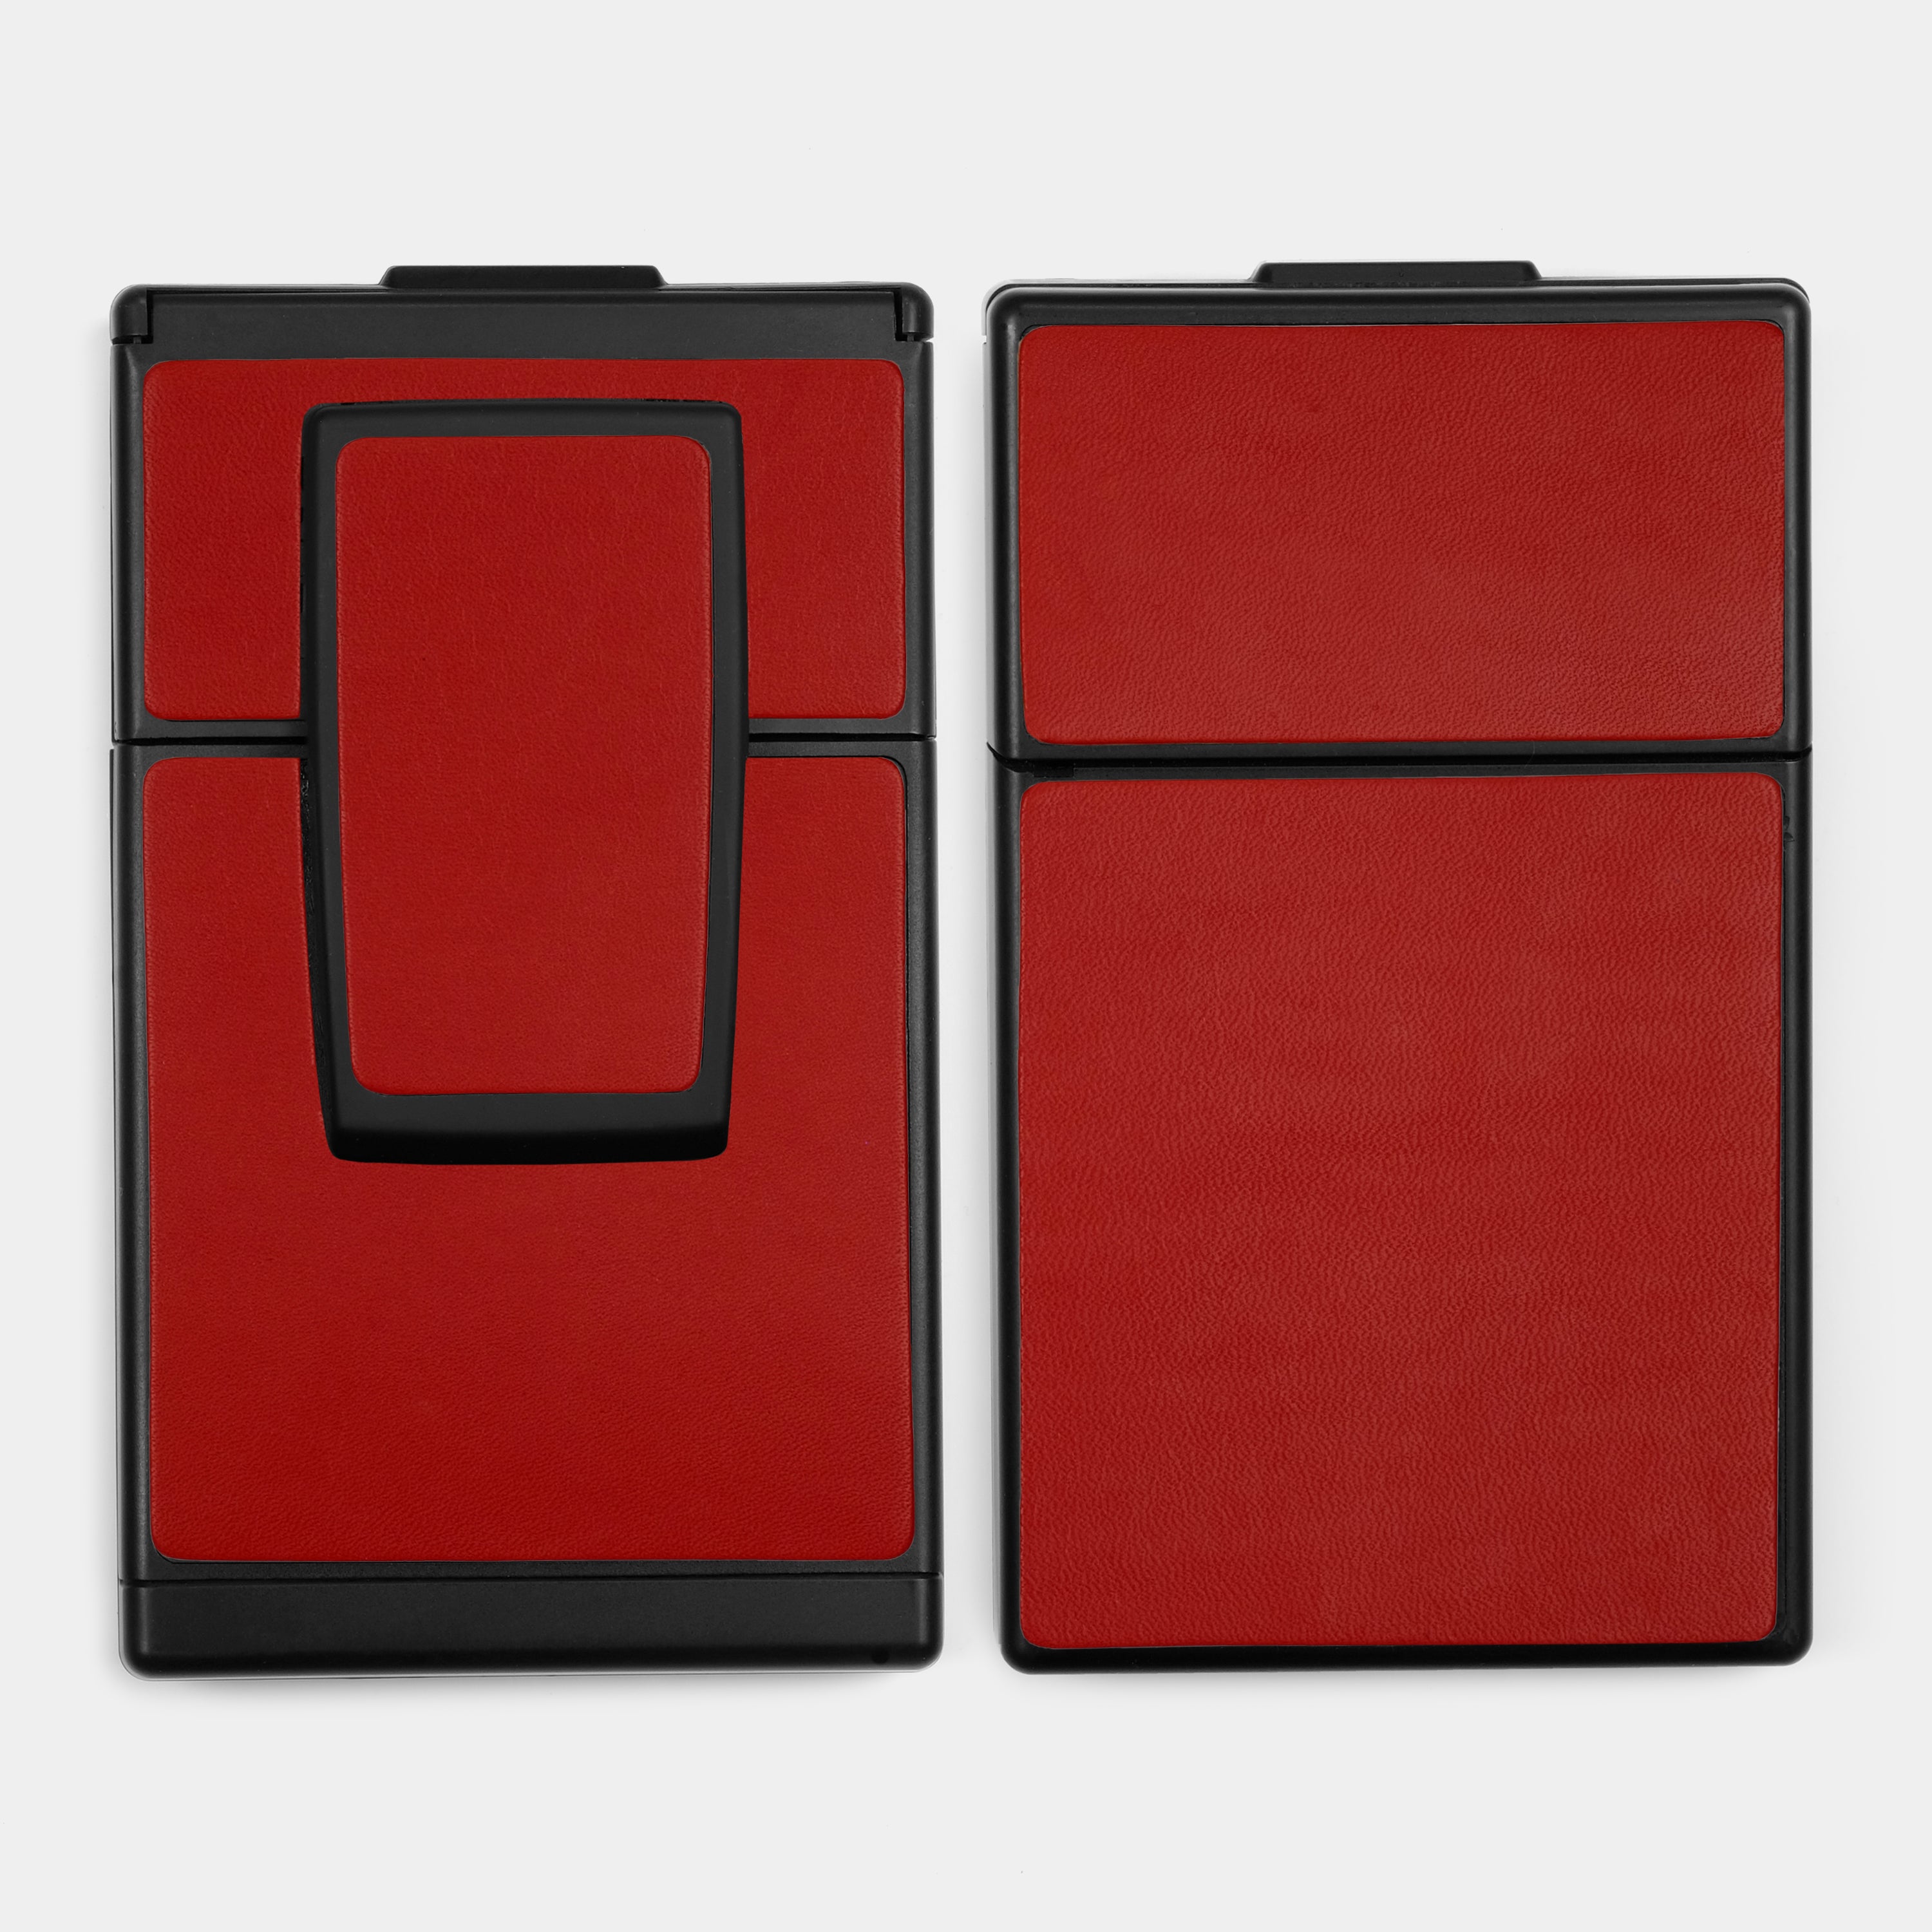 SX-70/SLR-680 Red Leather Camera Skins